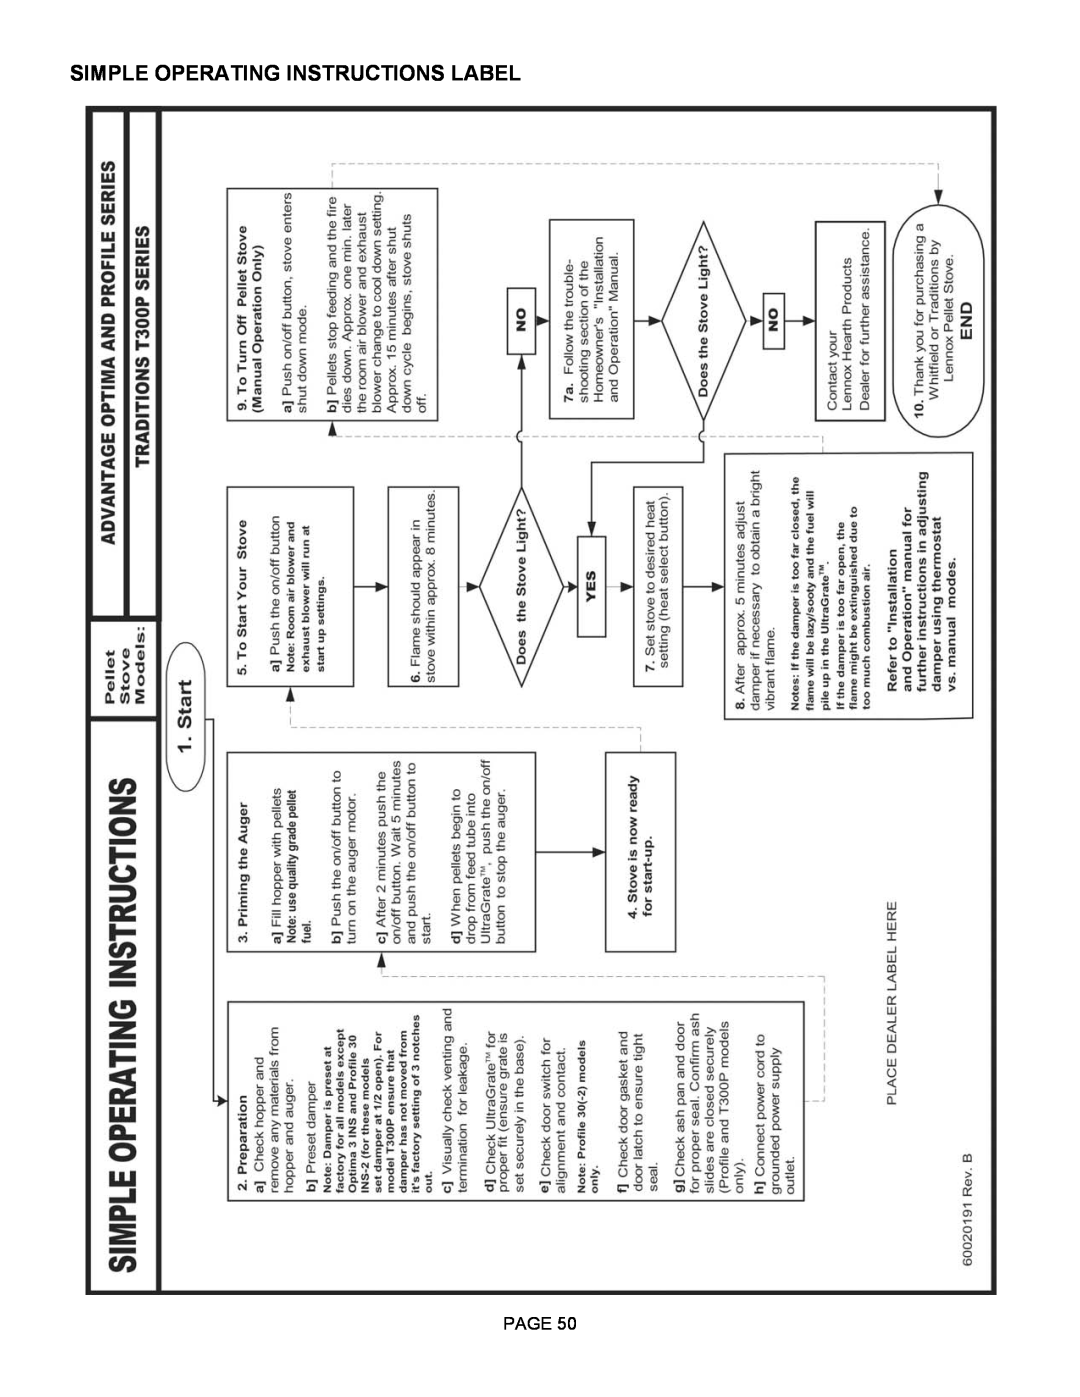 Lenoxx Electronics Optima 3 FS operation manual Simple Operating Instructions Label, Page 